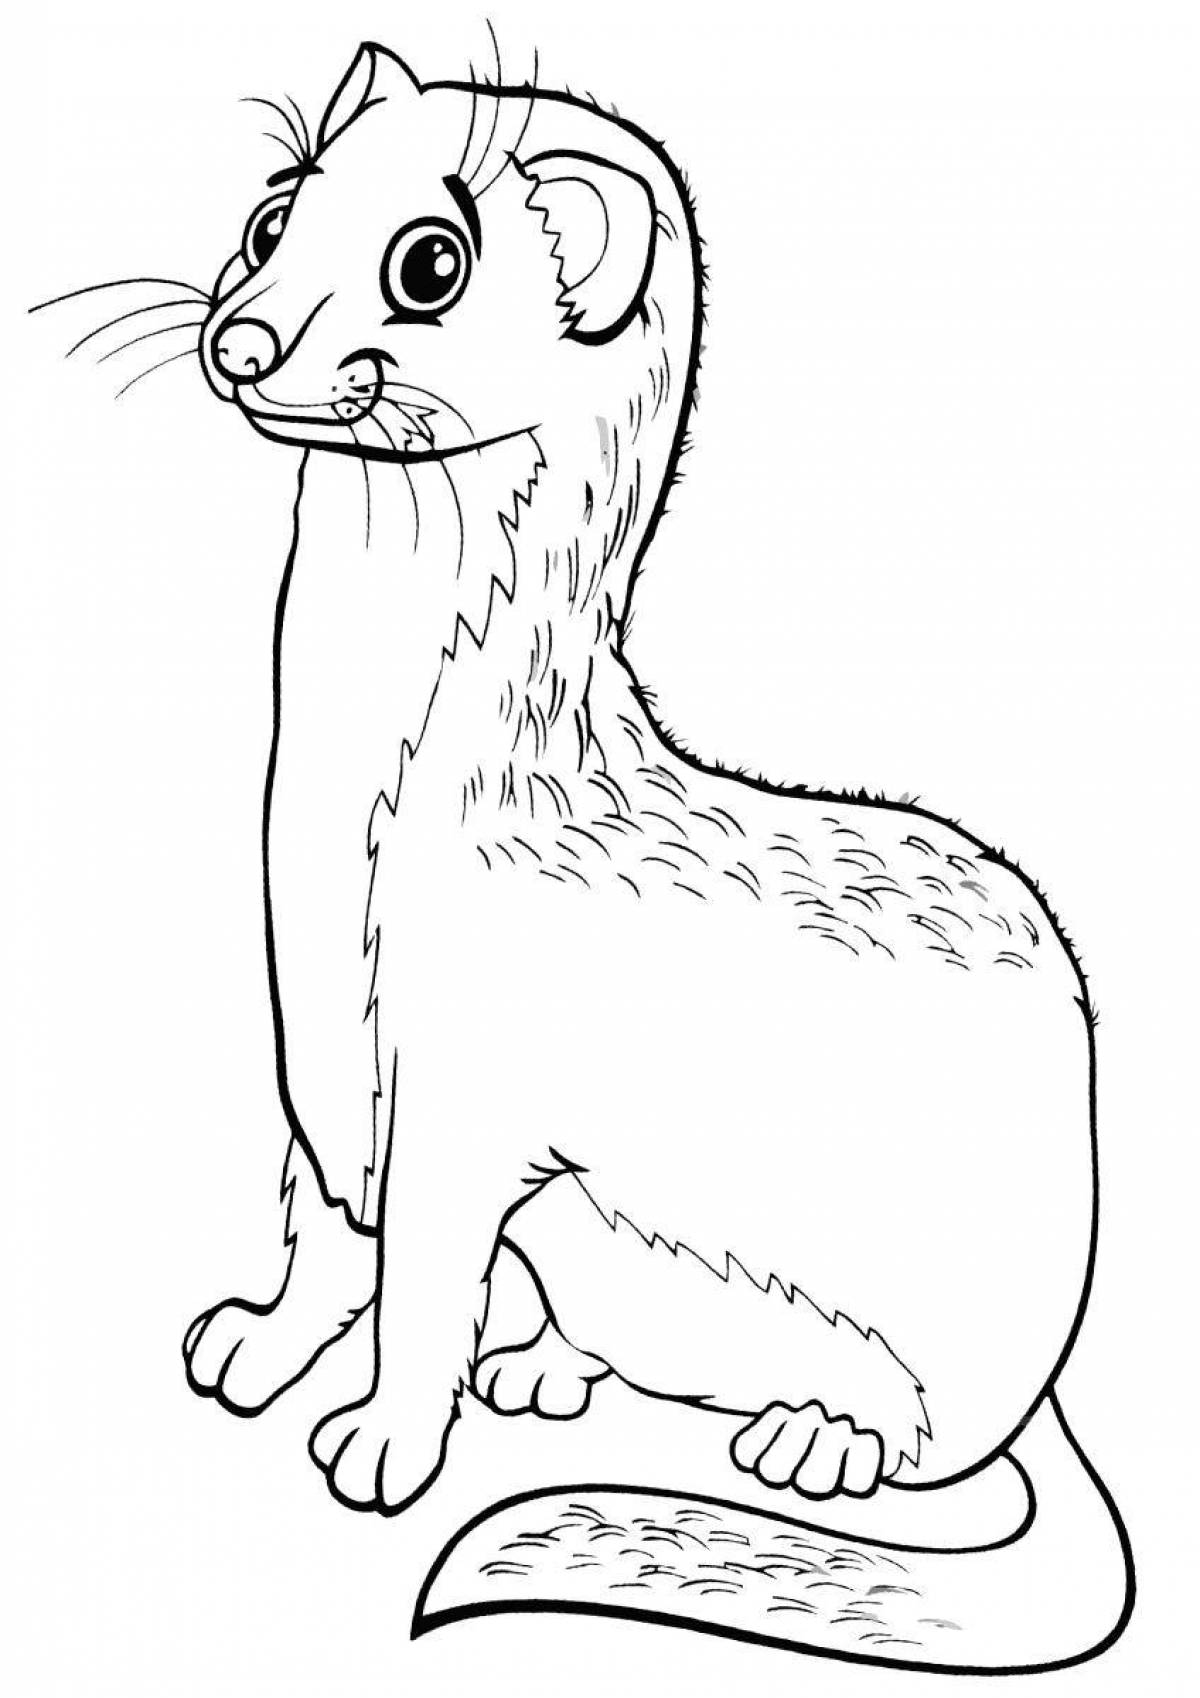 Delightful stoat coloring page